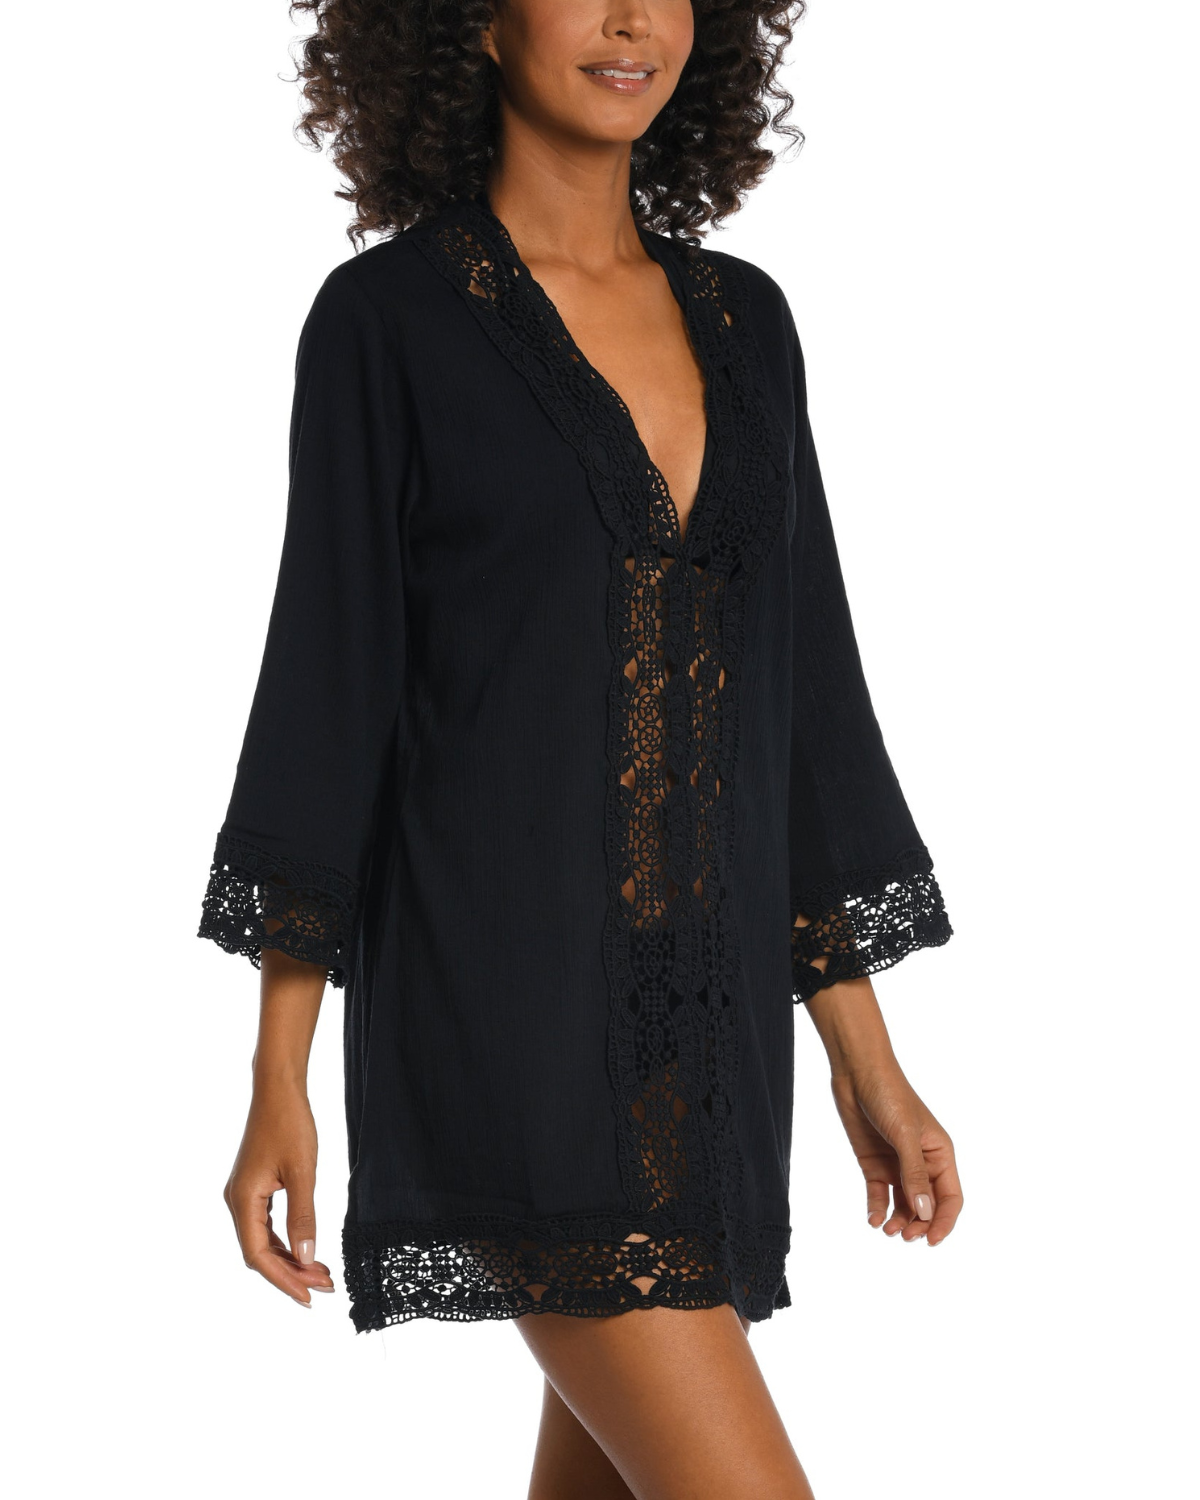 Model wearing a 3/4 sleeve v-neck tunic with a crochet trim in black